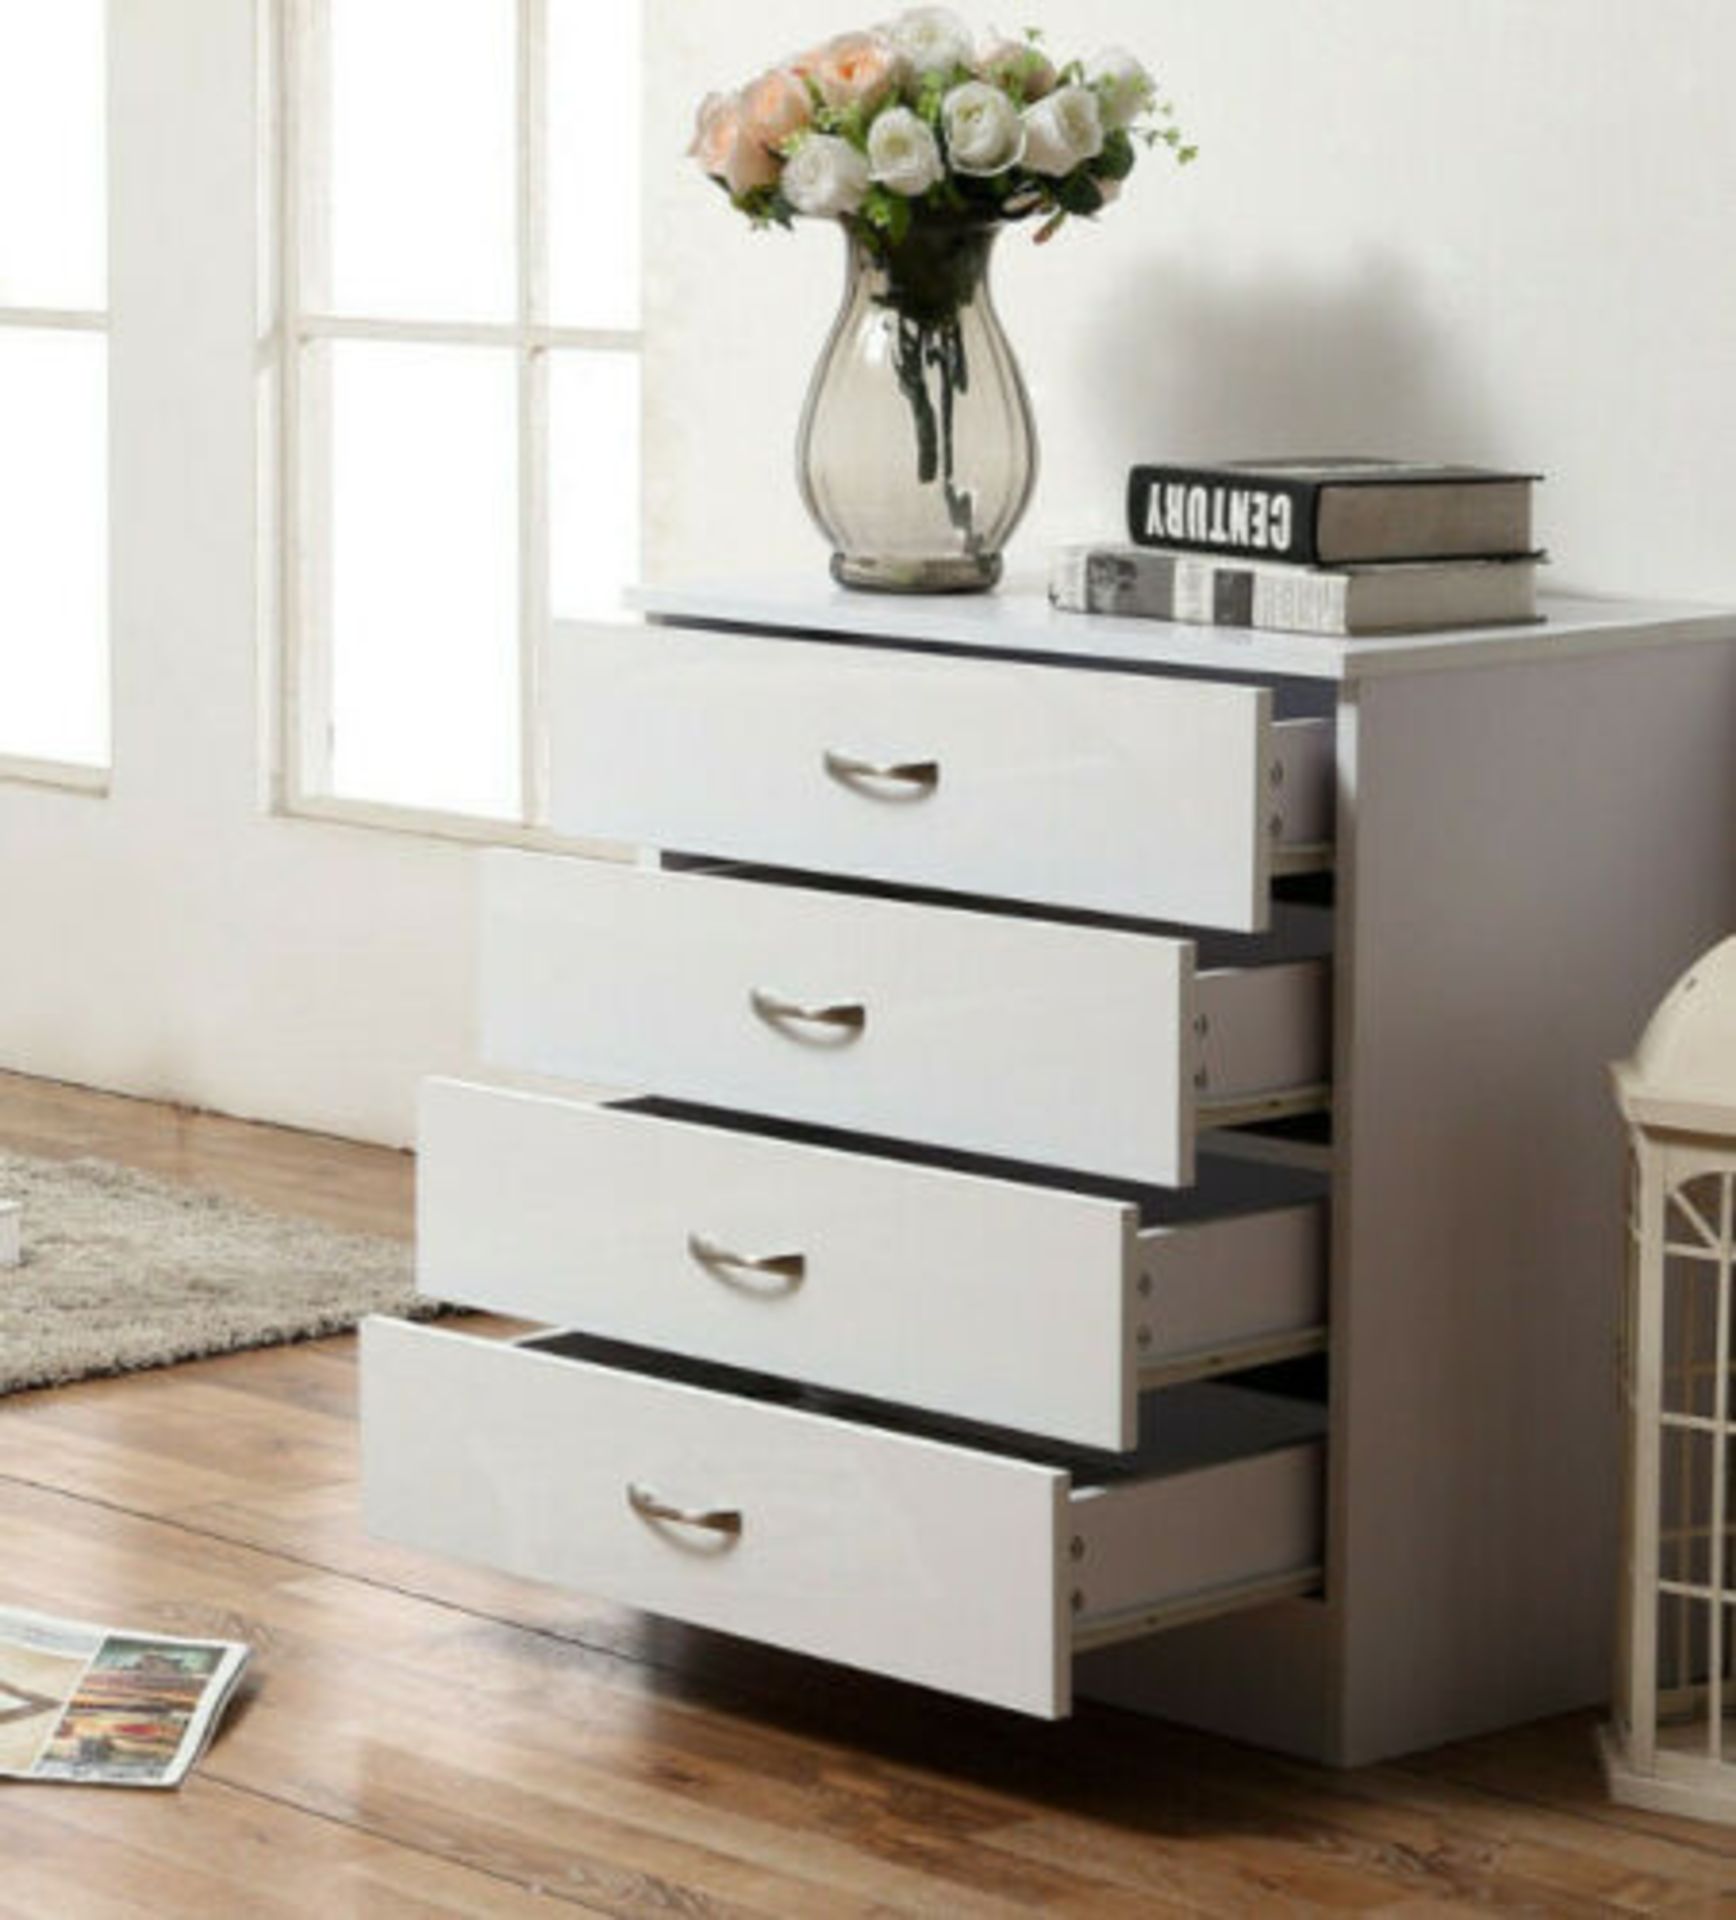 WHITE 4 DRAWER CHEST WITH HIGH GLOSS FRONTS - Image 4 of 4